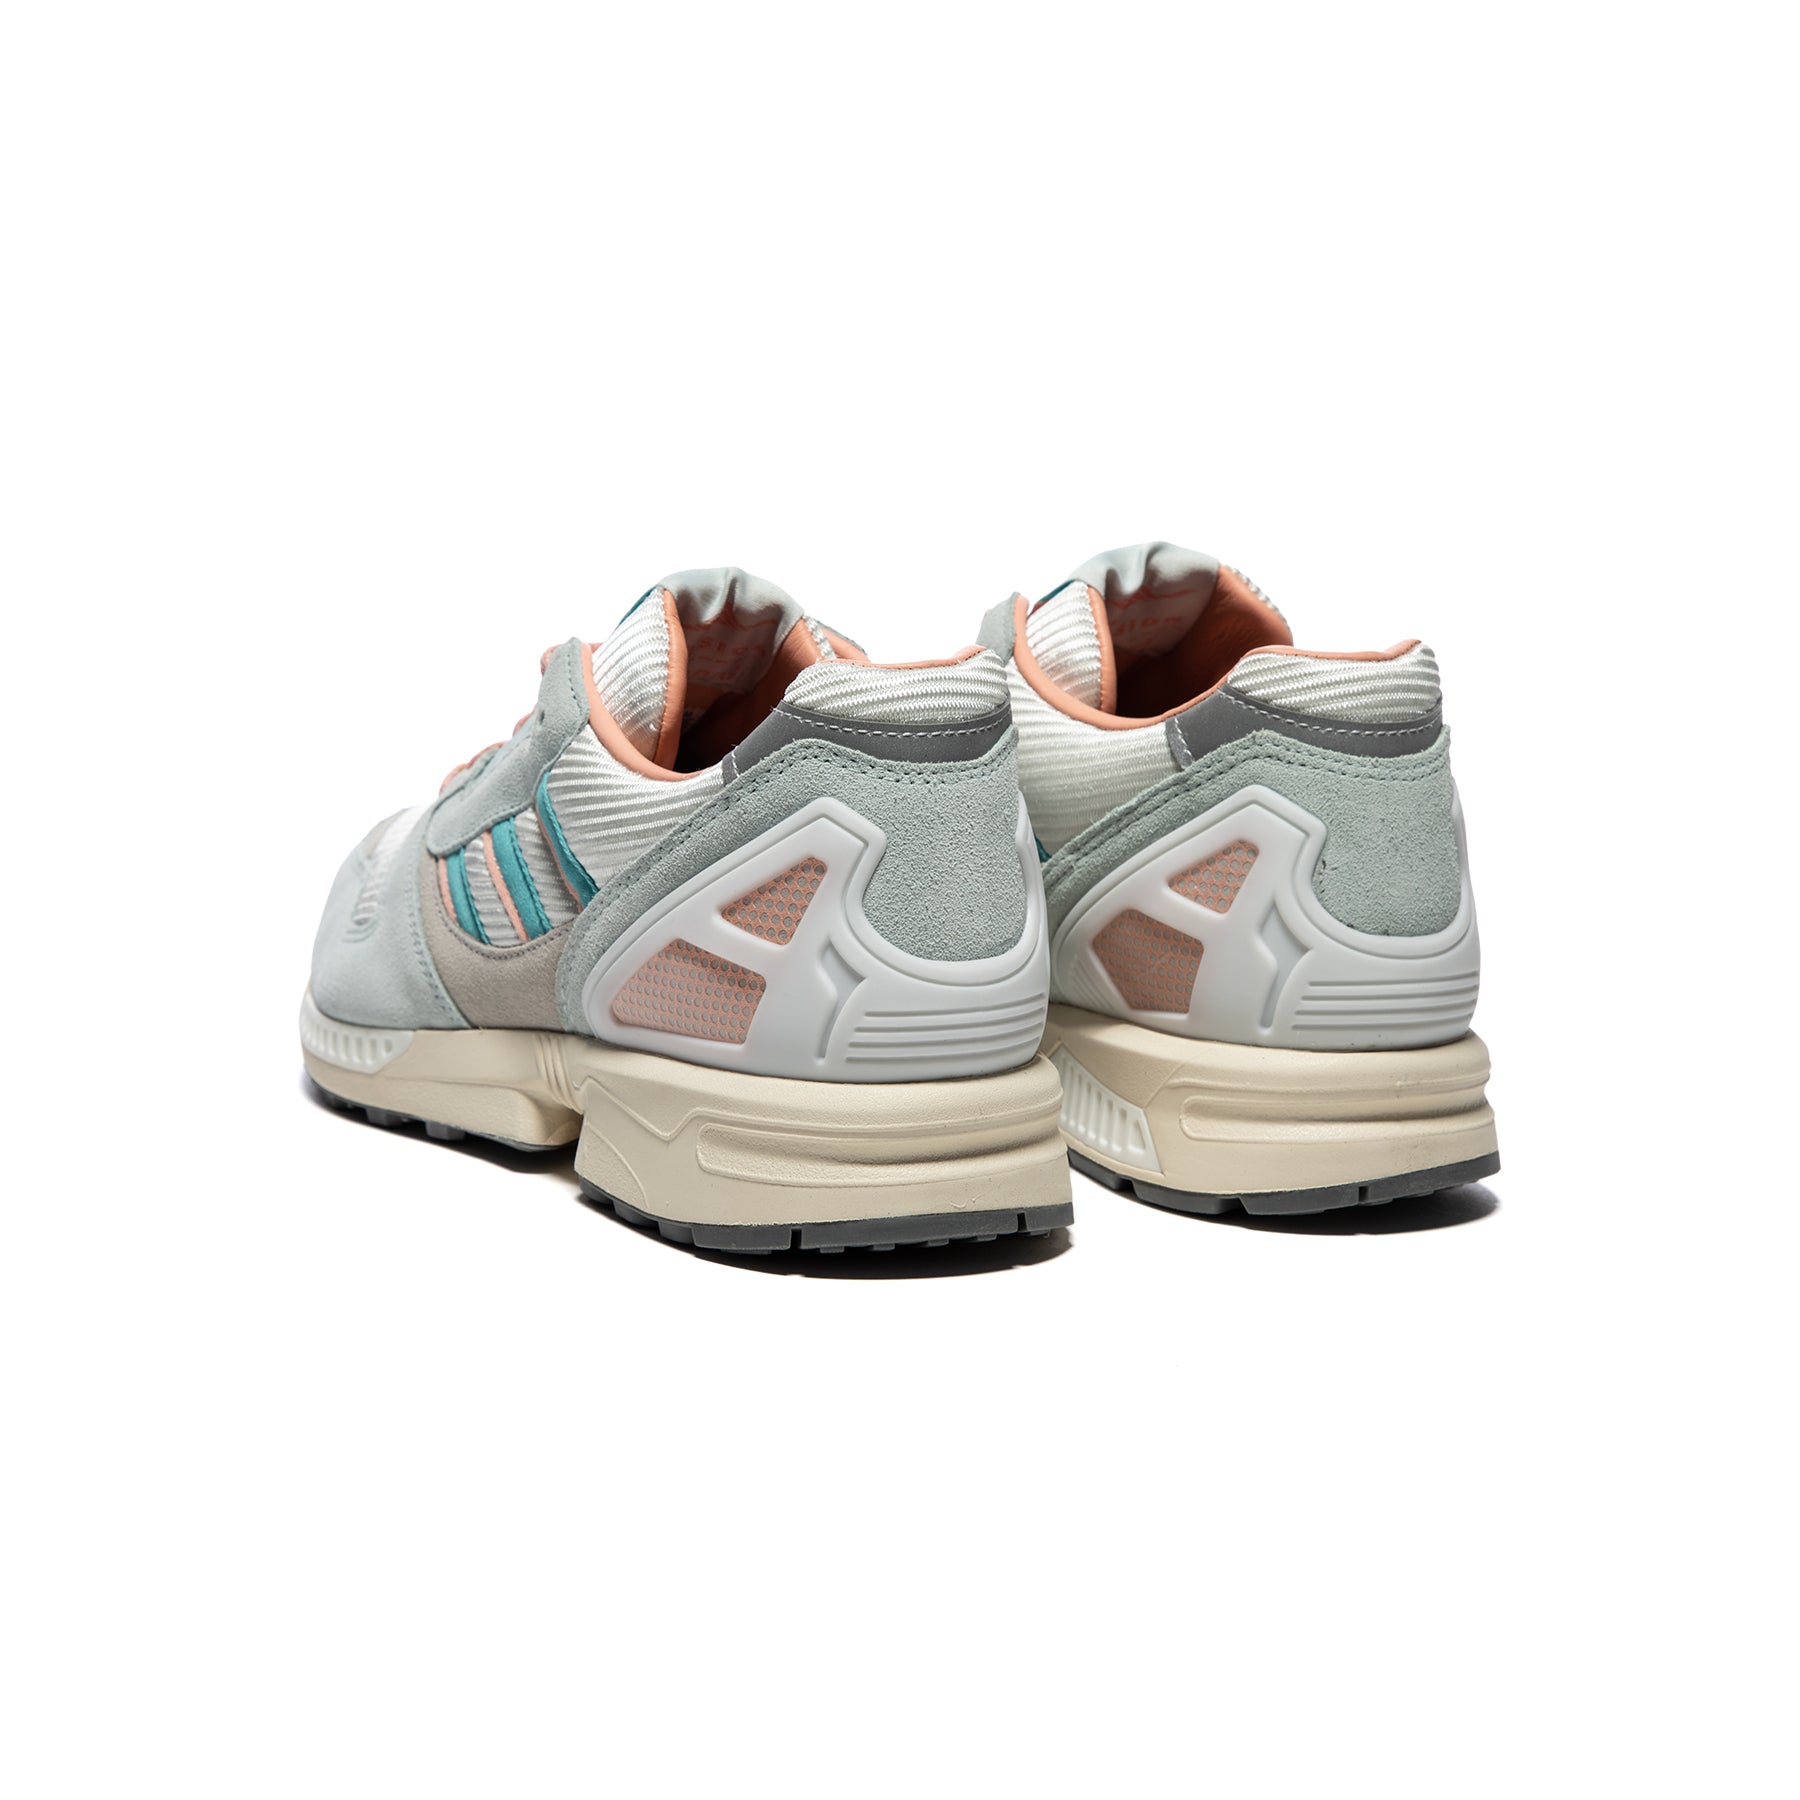 adidas ZX 8000 (Ice Mint/White) – CNCPTS